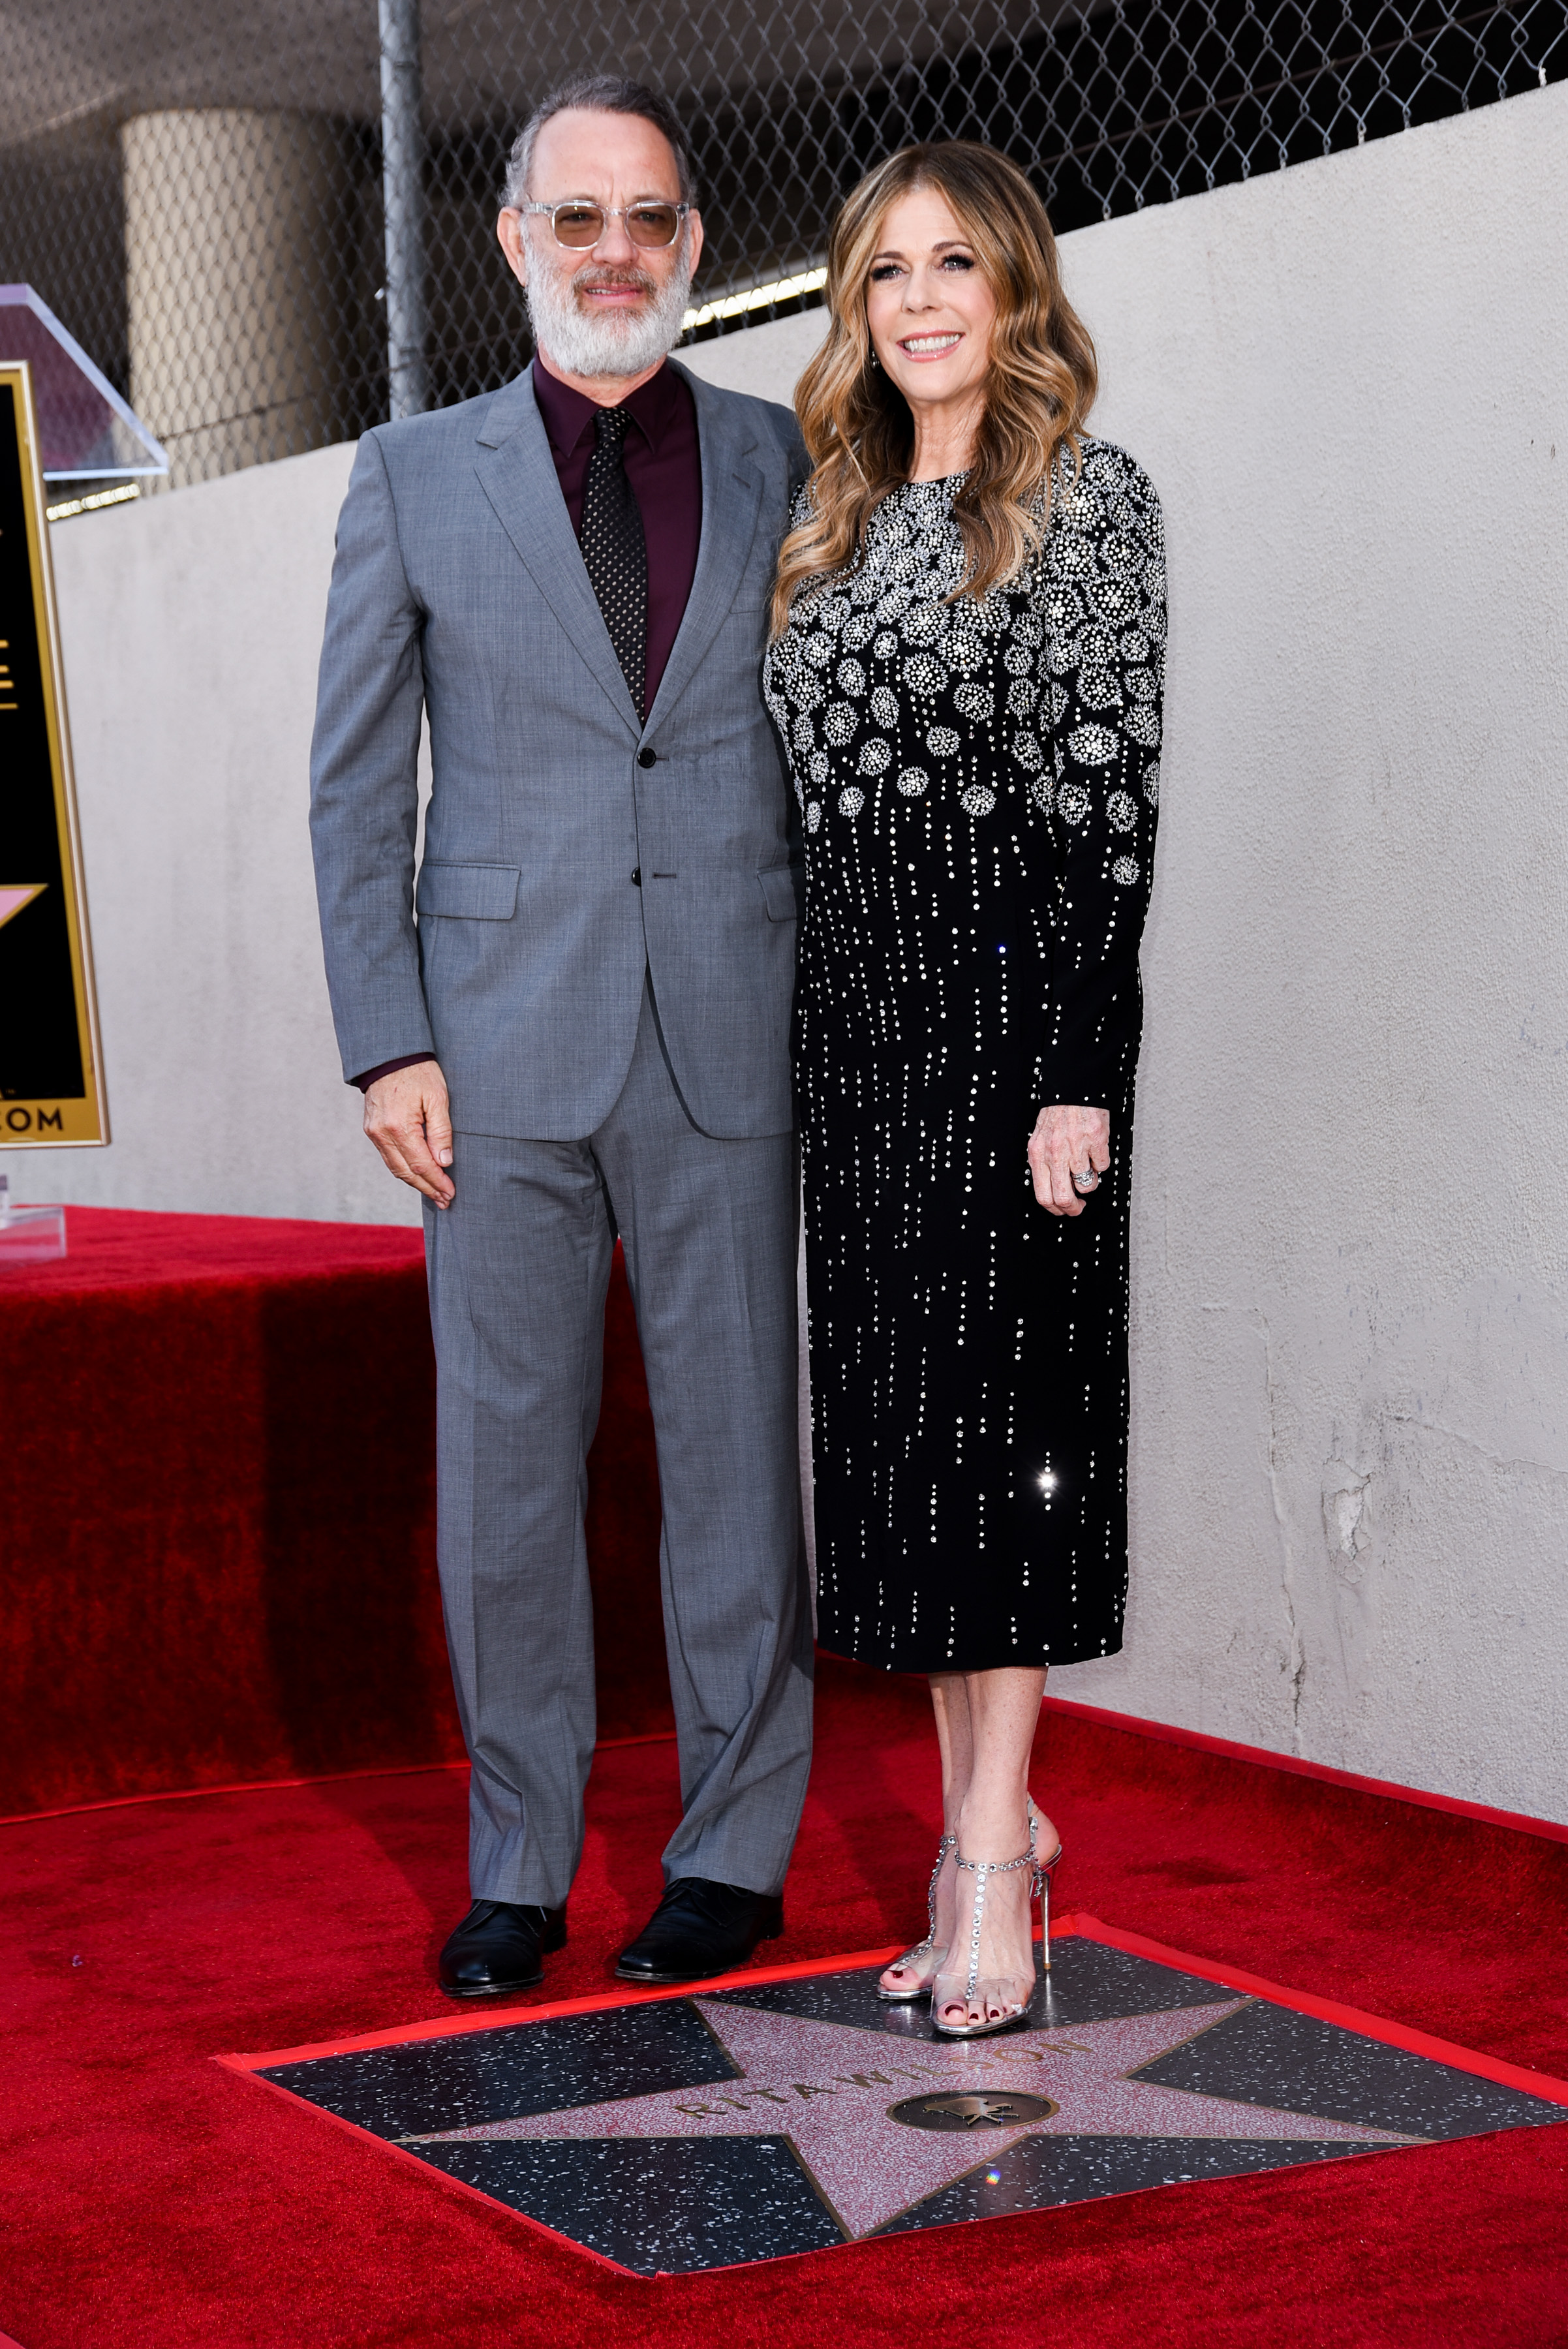 Tom Hanks and Rita Wilson in Hollywood, California on March 29, 2019 | Source: Getty Images